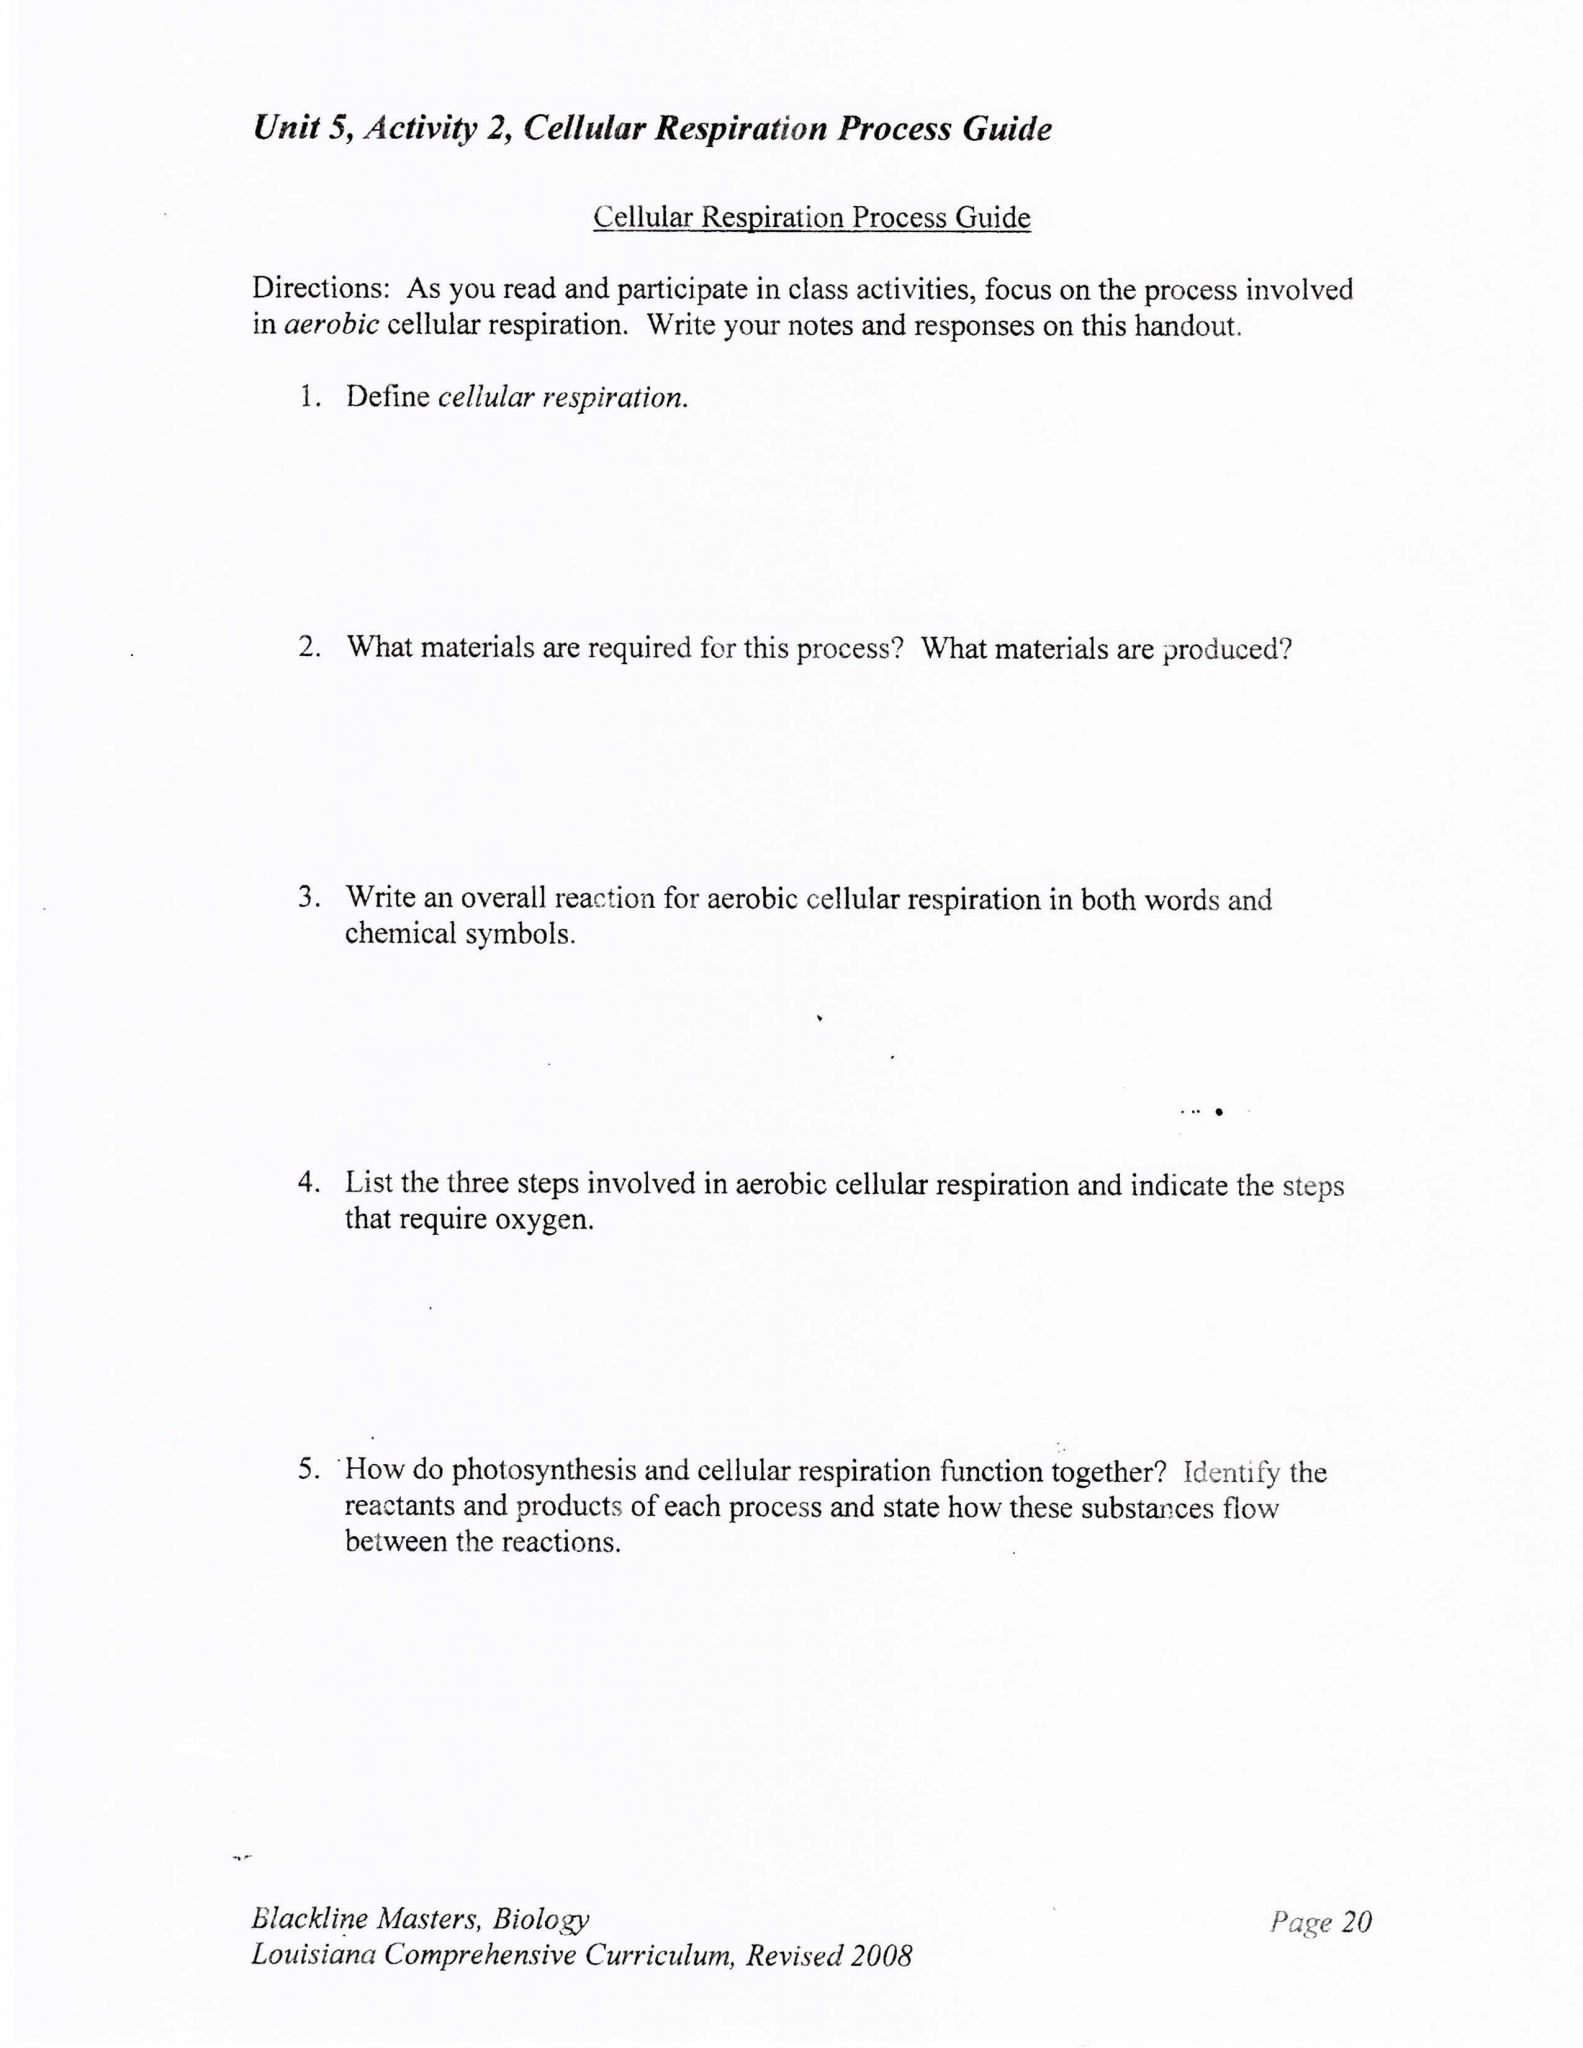 Photosynthesis and Cellular Respiration Worksheet Answers as Well as Synthesis Crossword Puzzle and Answers Answer Key Worksheet